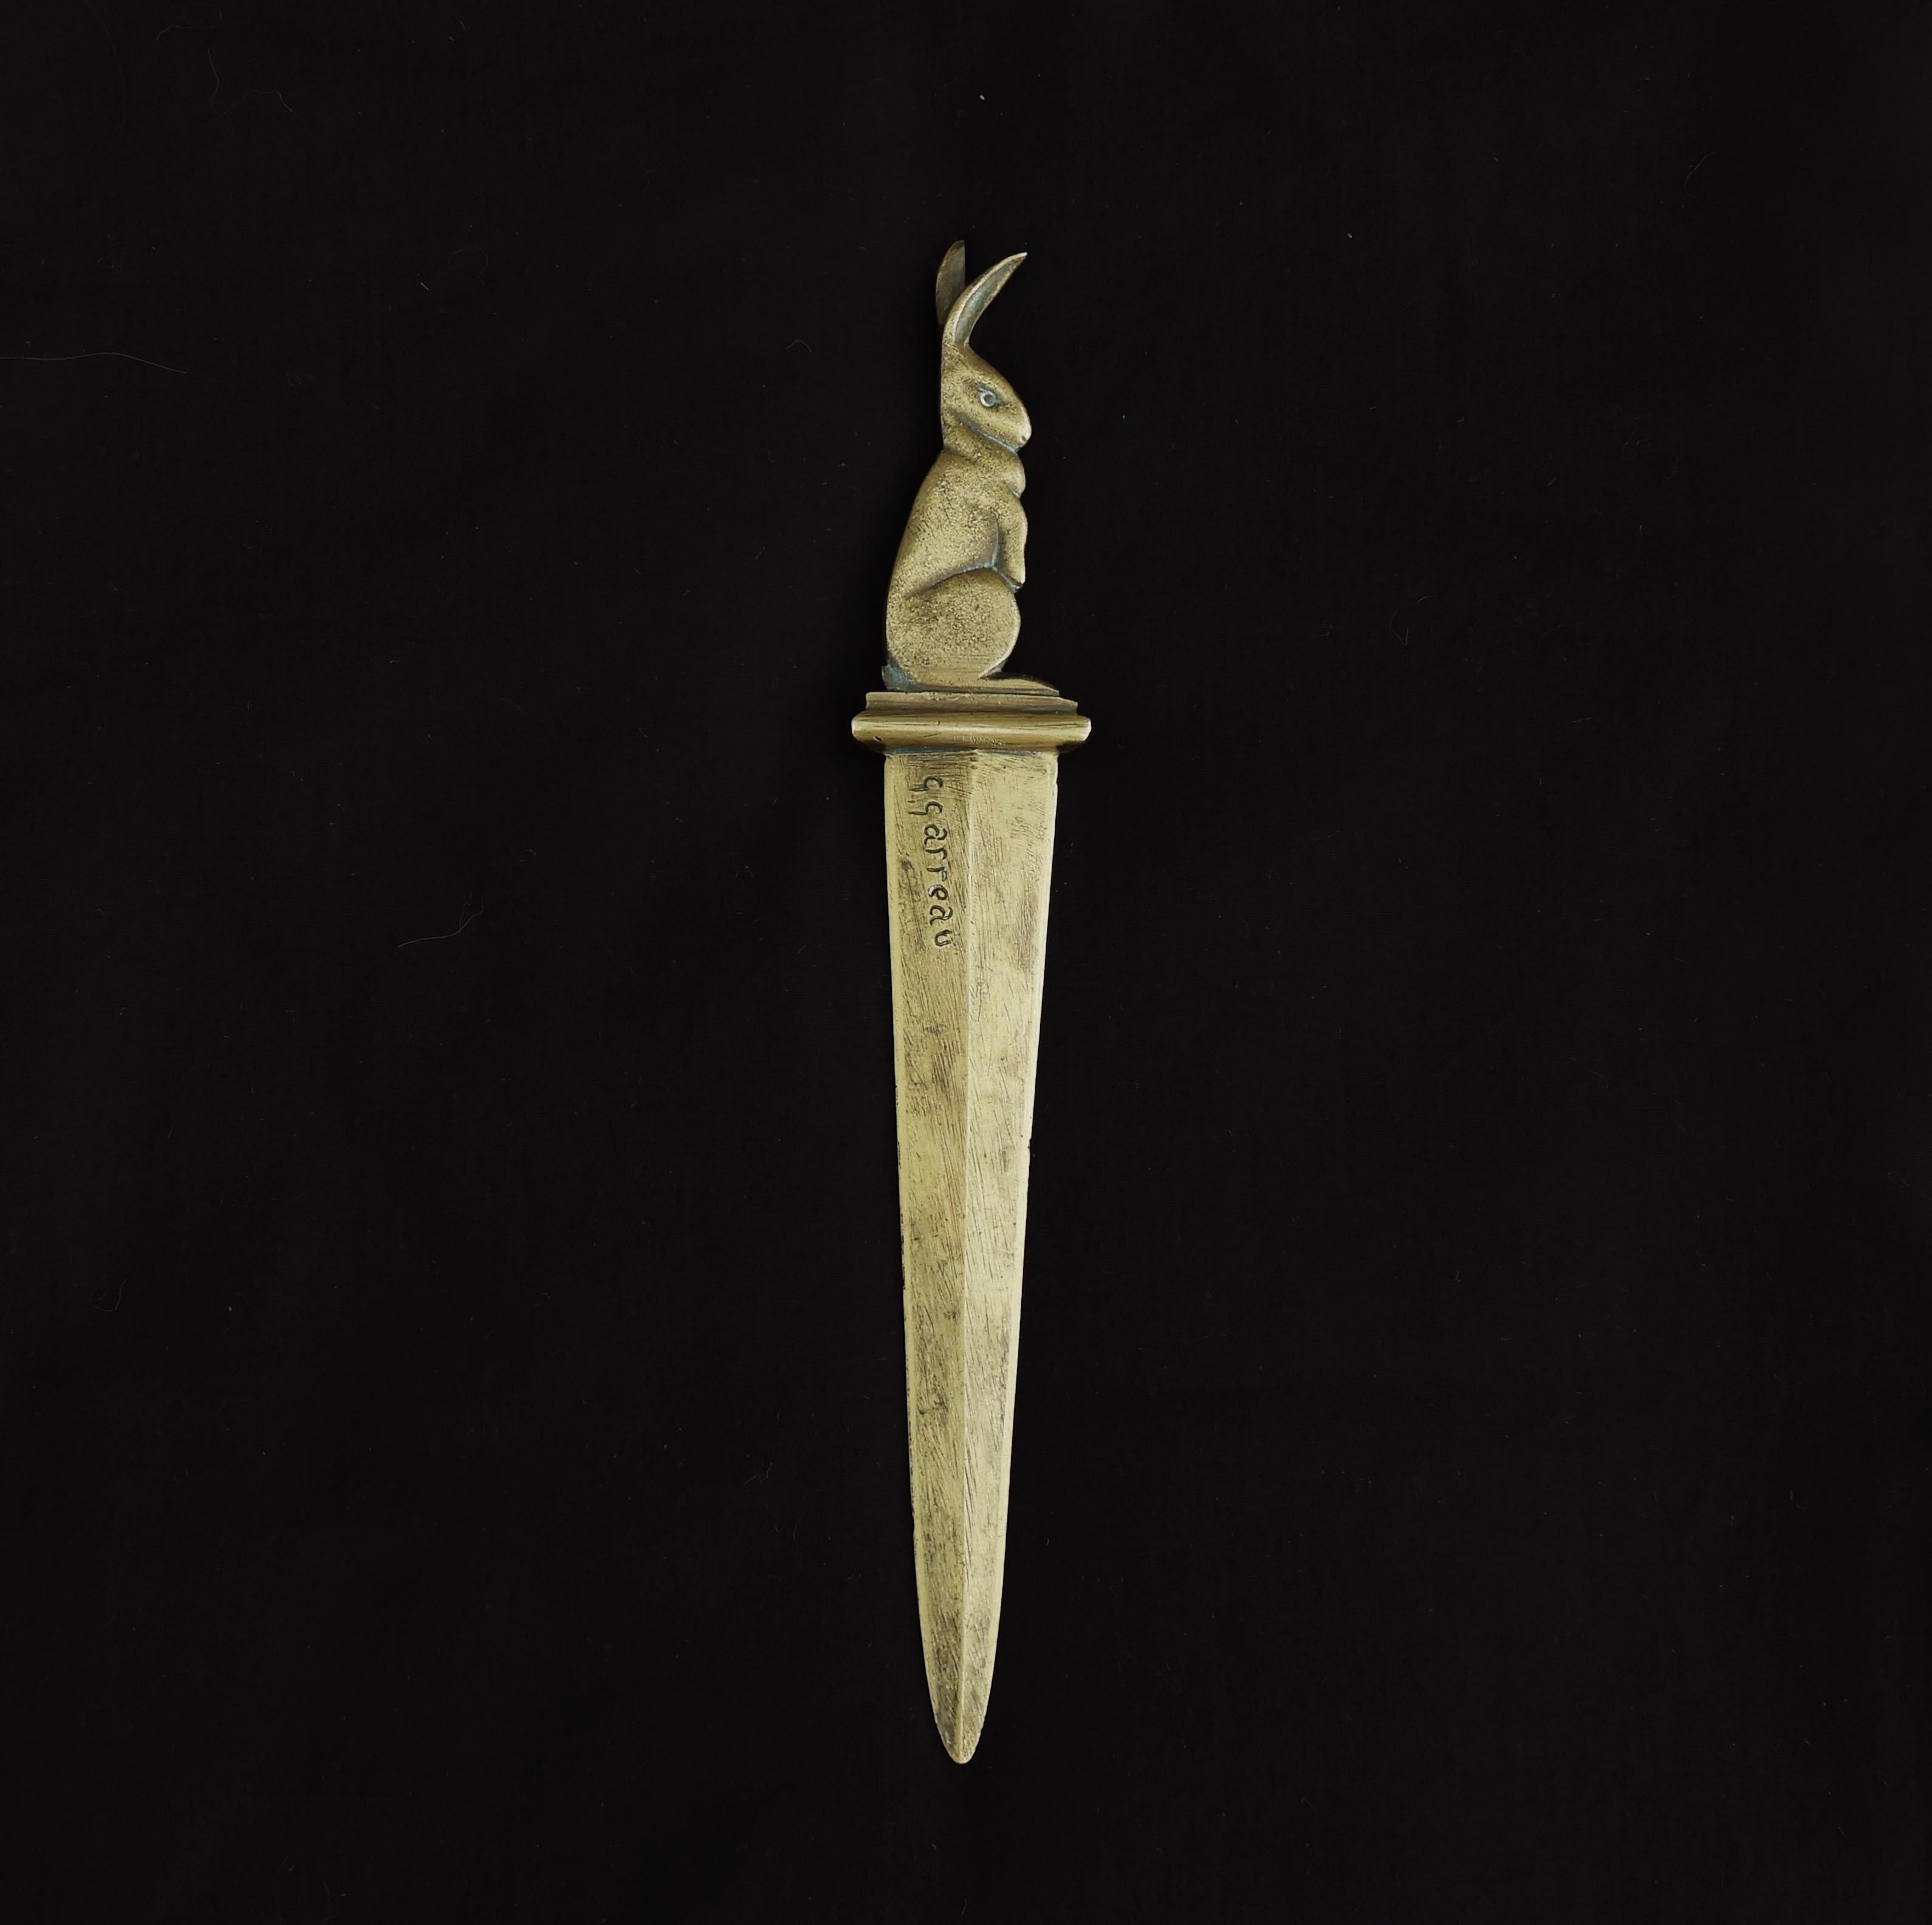 Bronze Letter Opener by Georges Raoul Garreau, 1885-1955 2